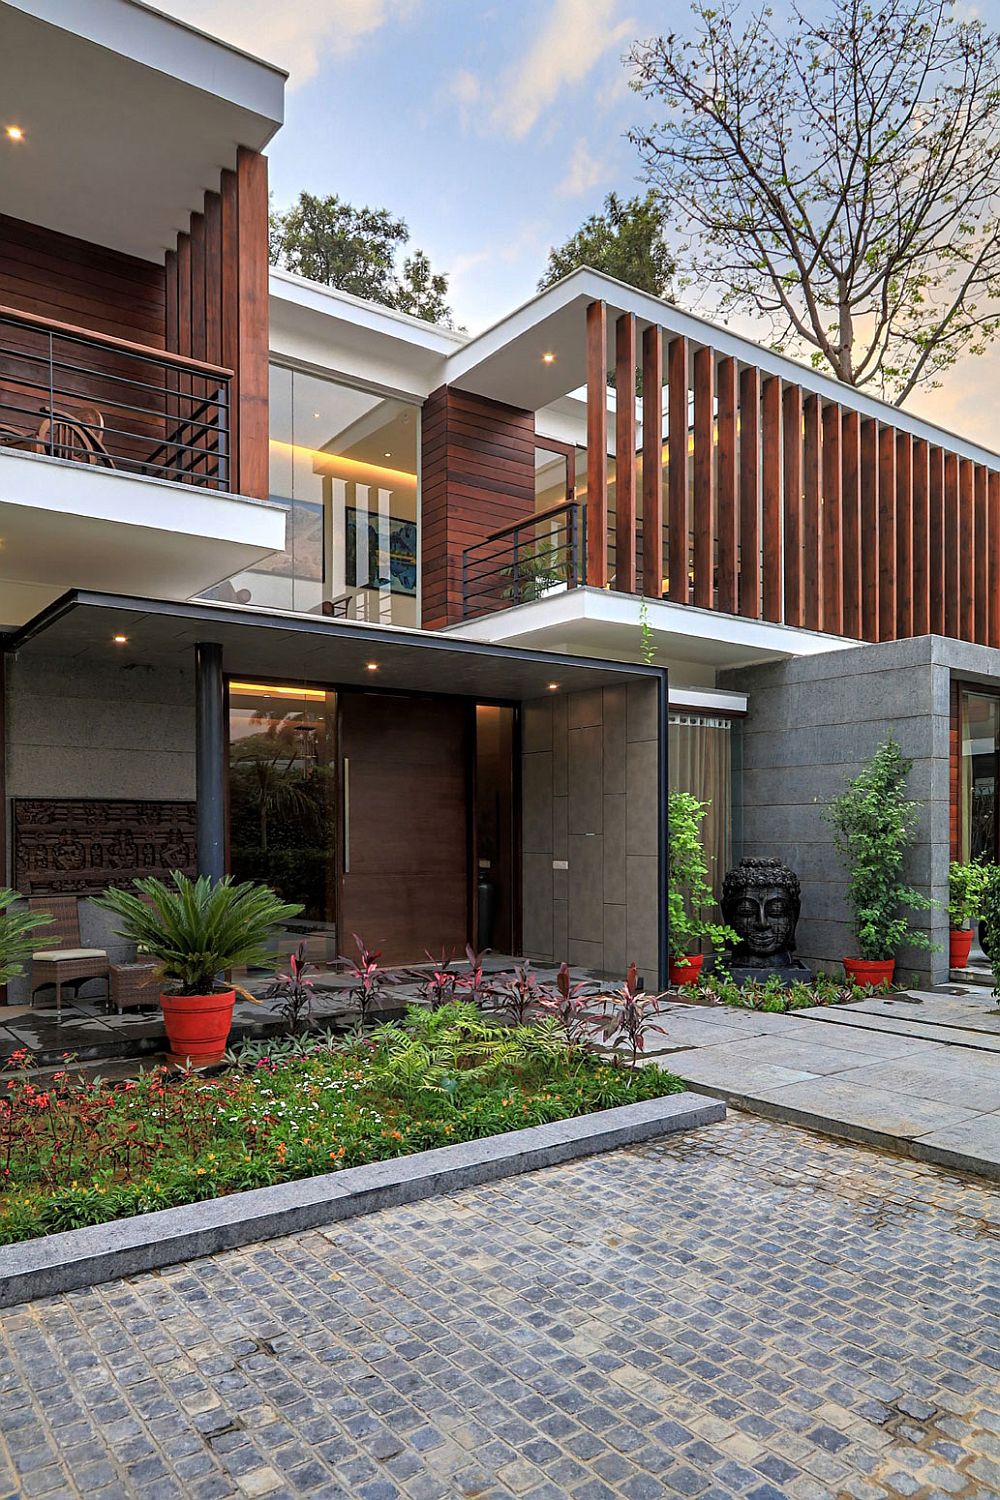 Wooden Slats, Glass Walls and Modern Grandeur: Gallery House in India